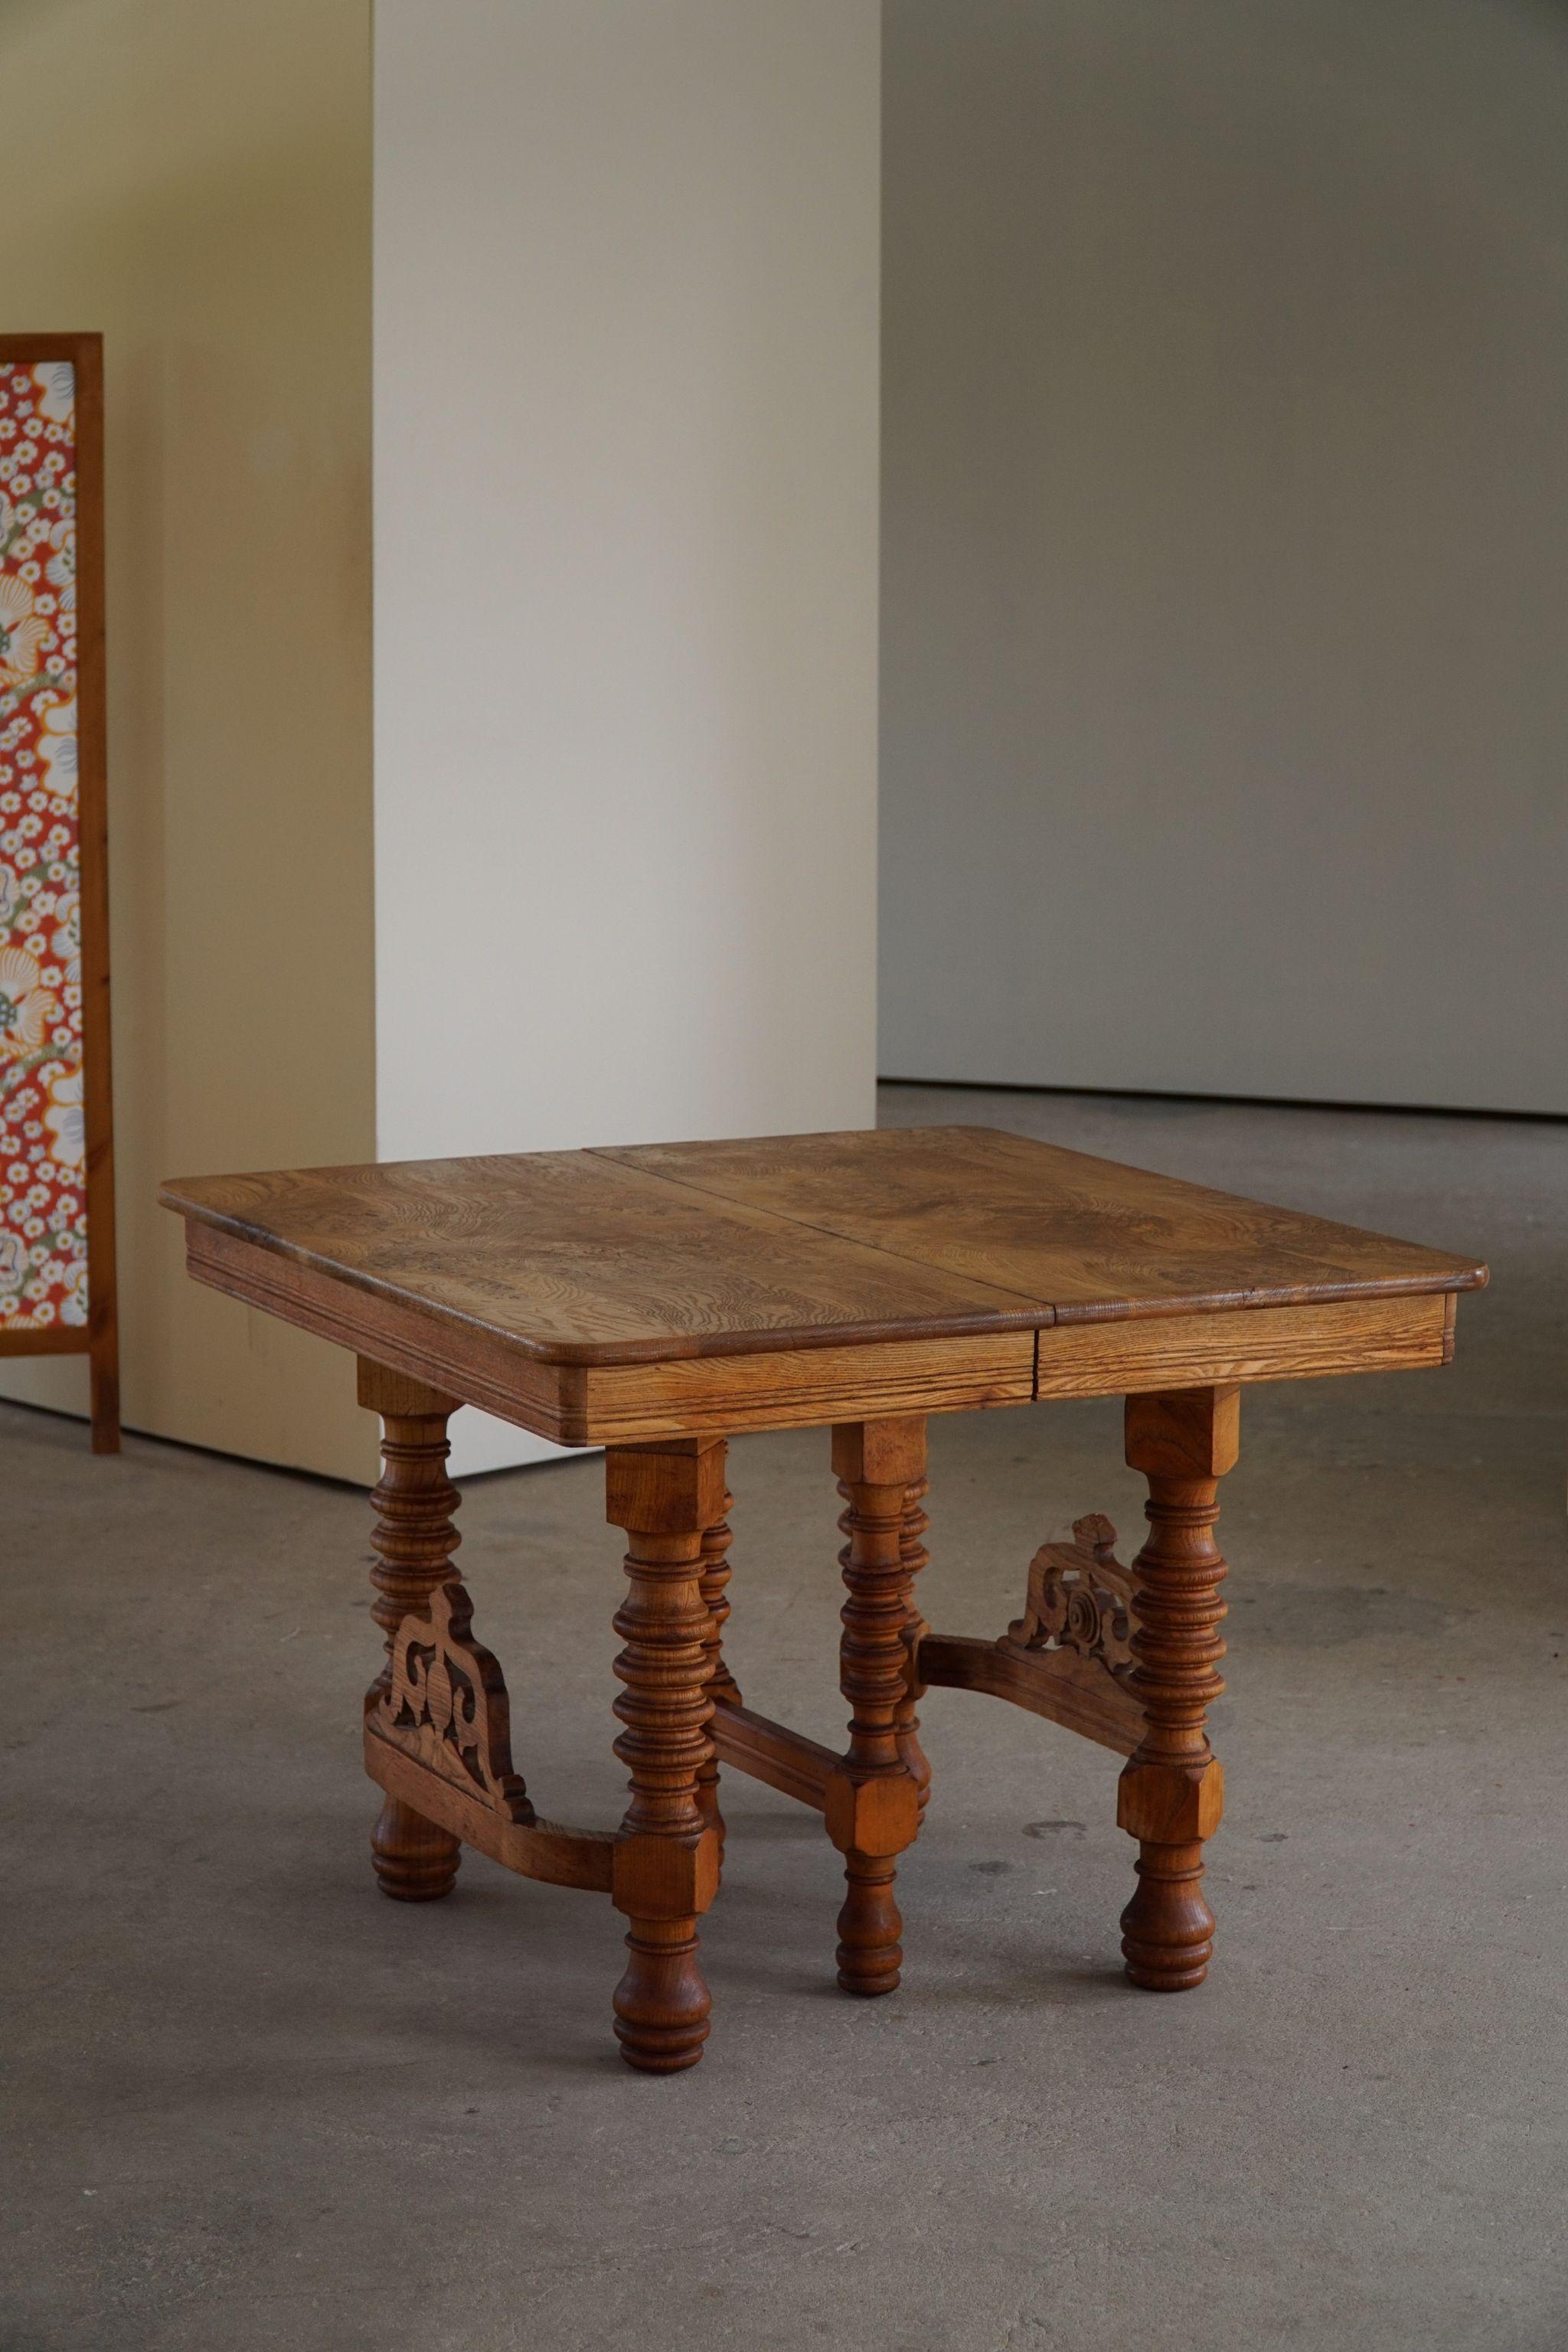 Gorgeous baroque dining table / desk in solid oak. Finely handcrafted in the late 19th century by a Danish Cabinetmaker. Decorative decadent carvings. 

This fine table will complement many interior styles. A modern, antique, classic, Scandinavian